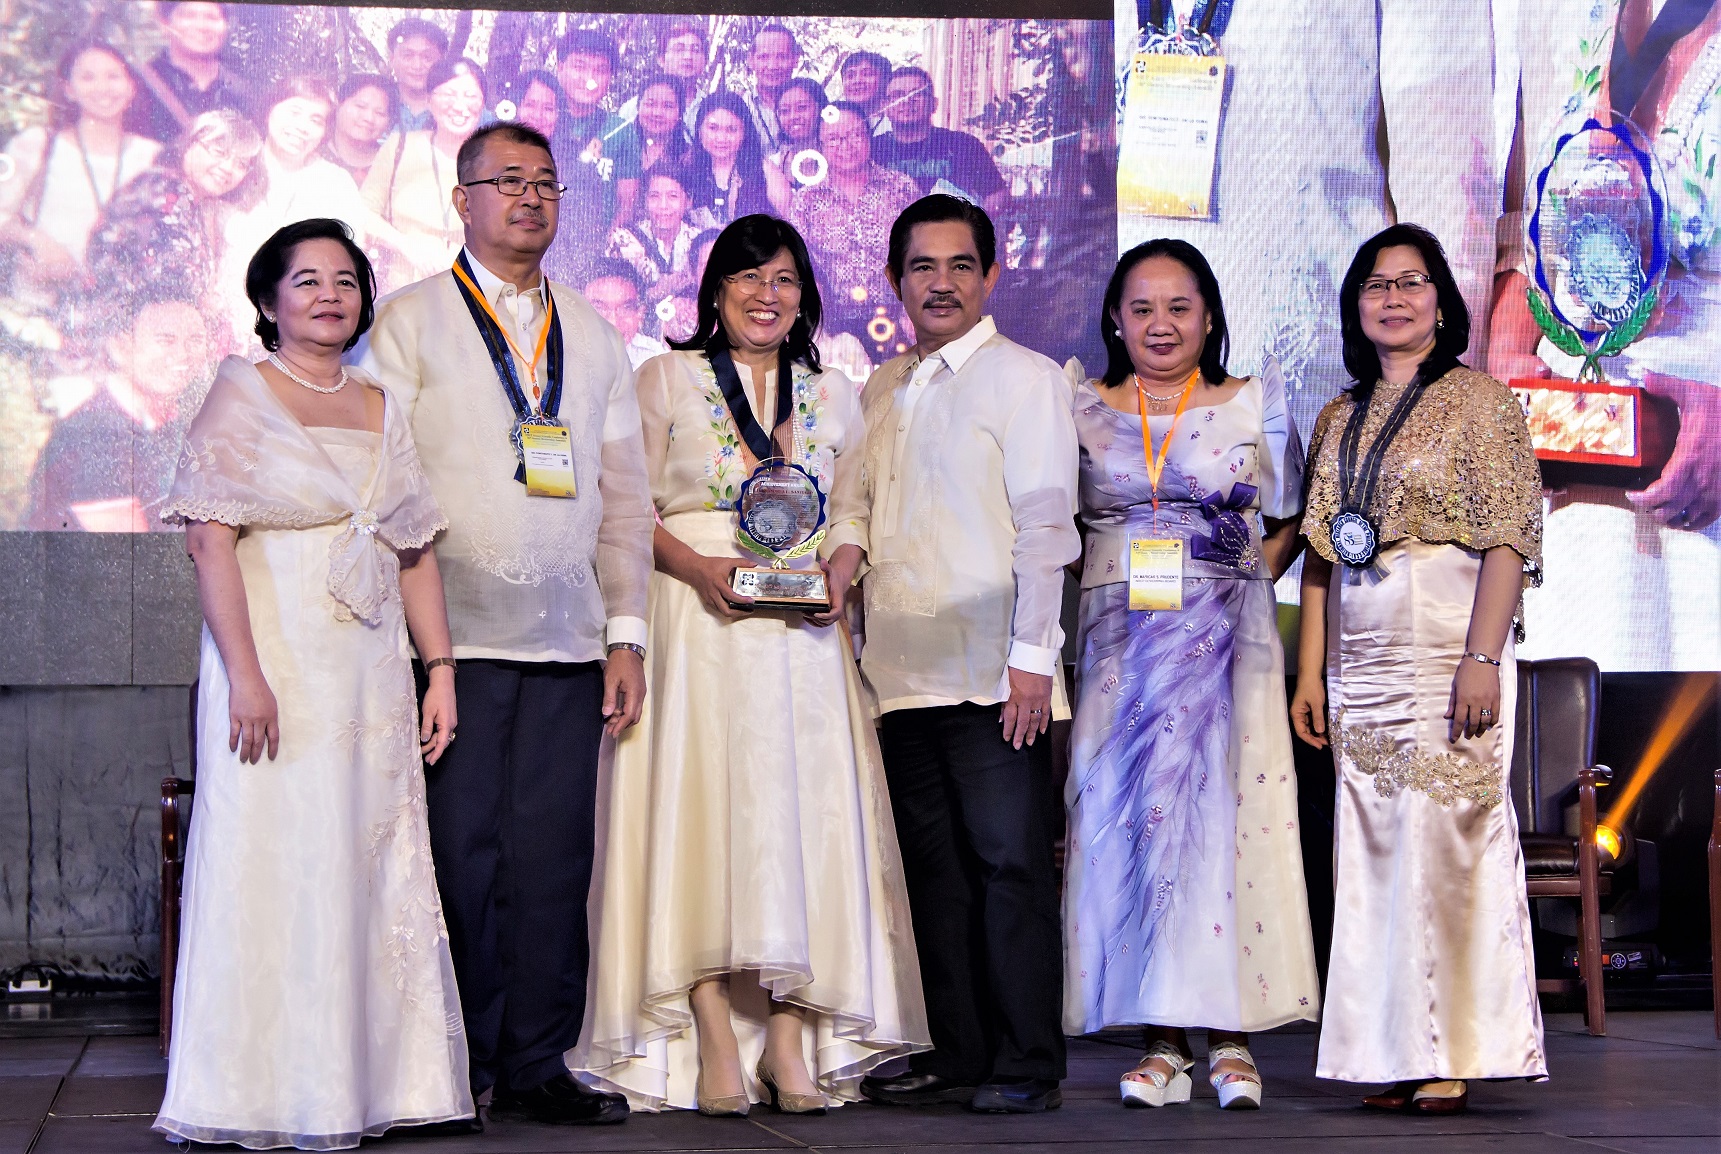 Professor Andrea Santiago and Professor Fernando Roxas (third and fourth from left) at NRCP 85th General Membership Assembly and Annual Scientific Conference.